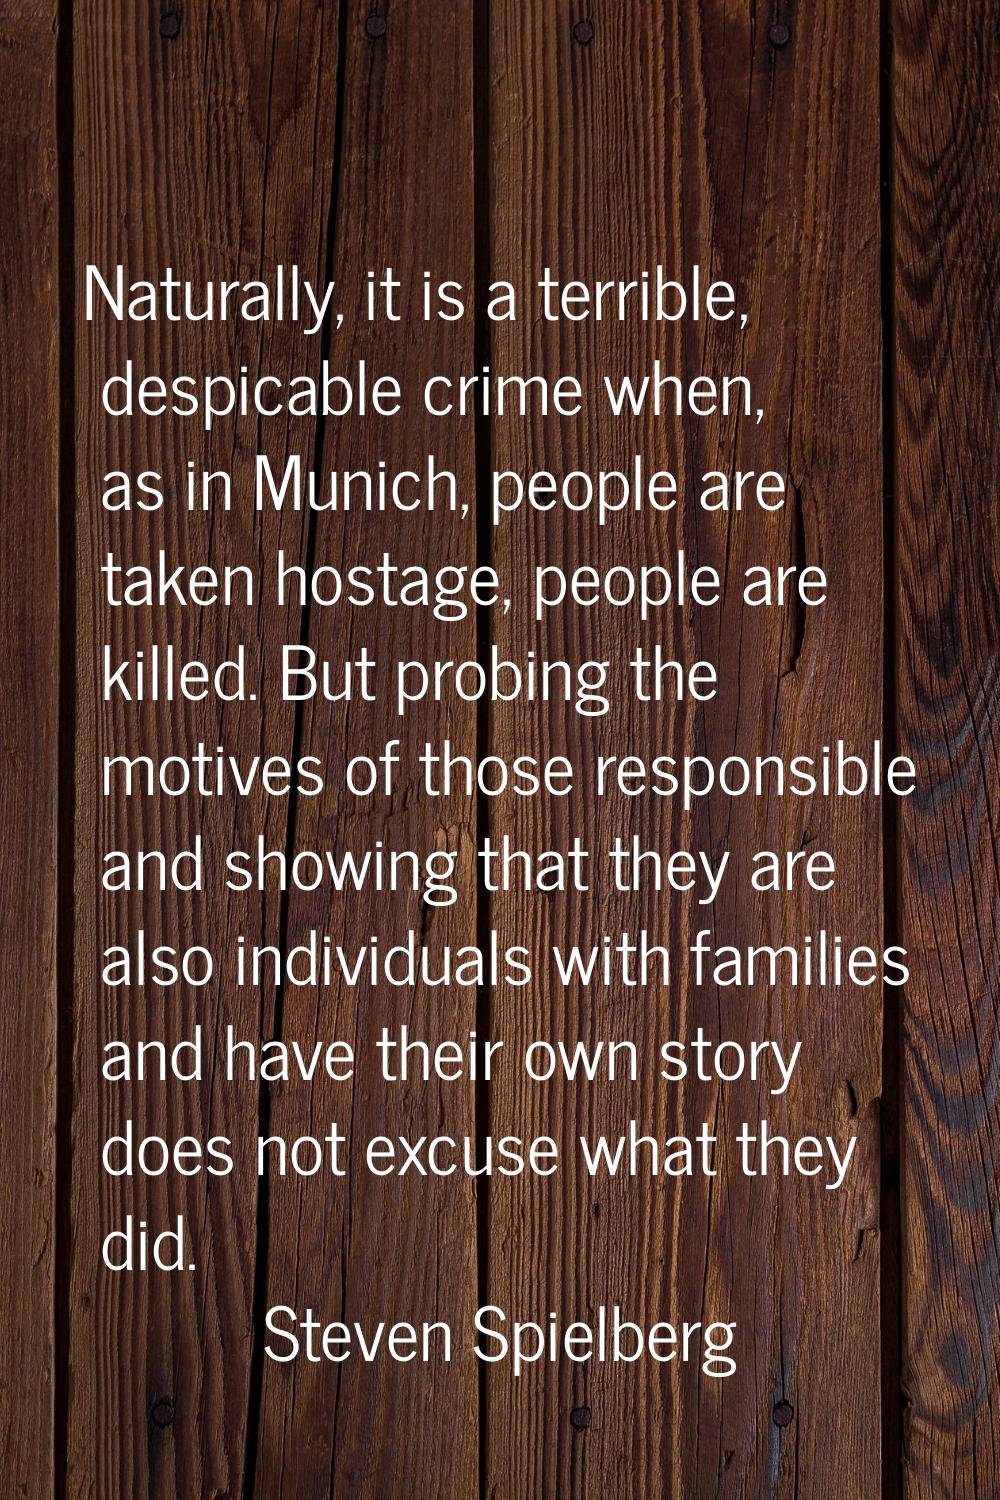 Naturally, it is a terrible, despicable crime when, as in Munich, people are taken hostage, people 